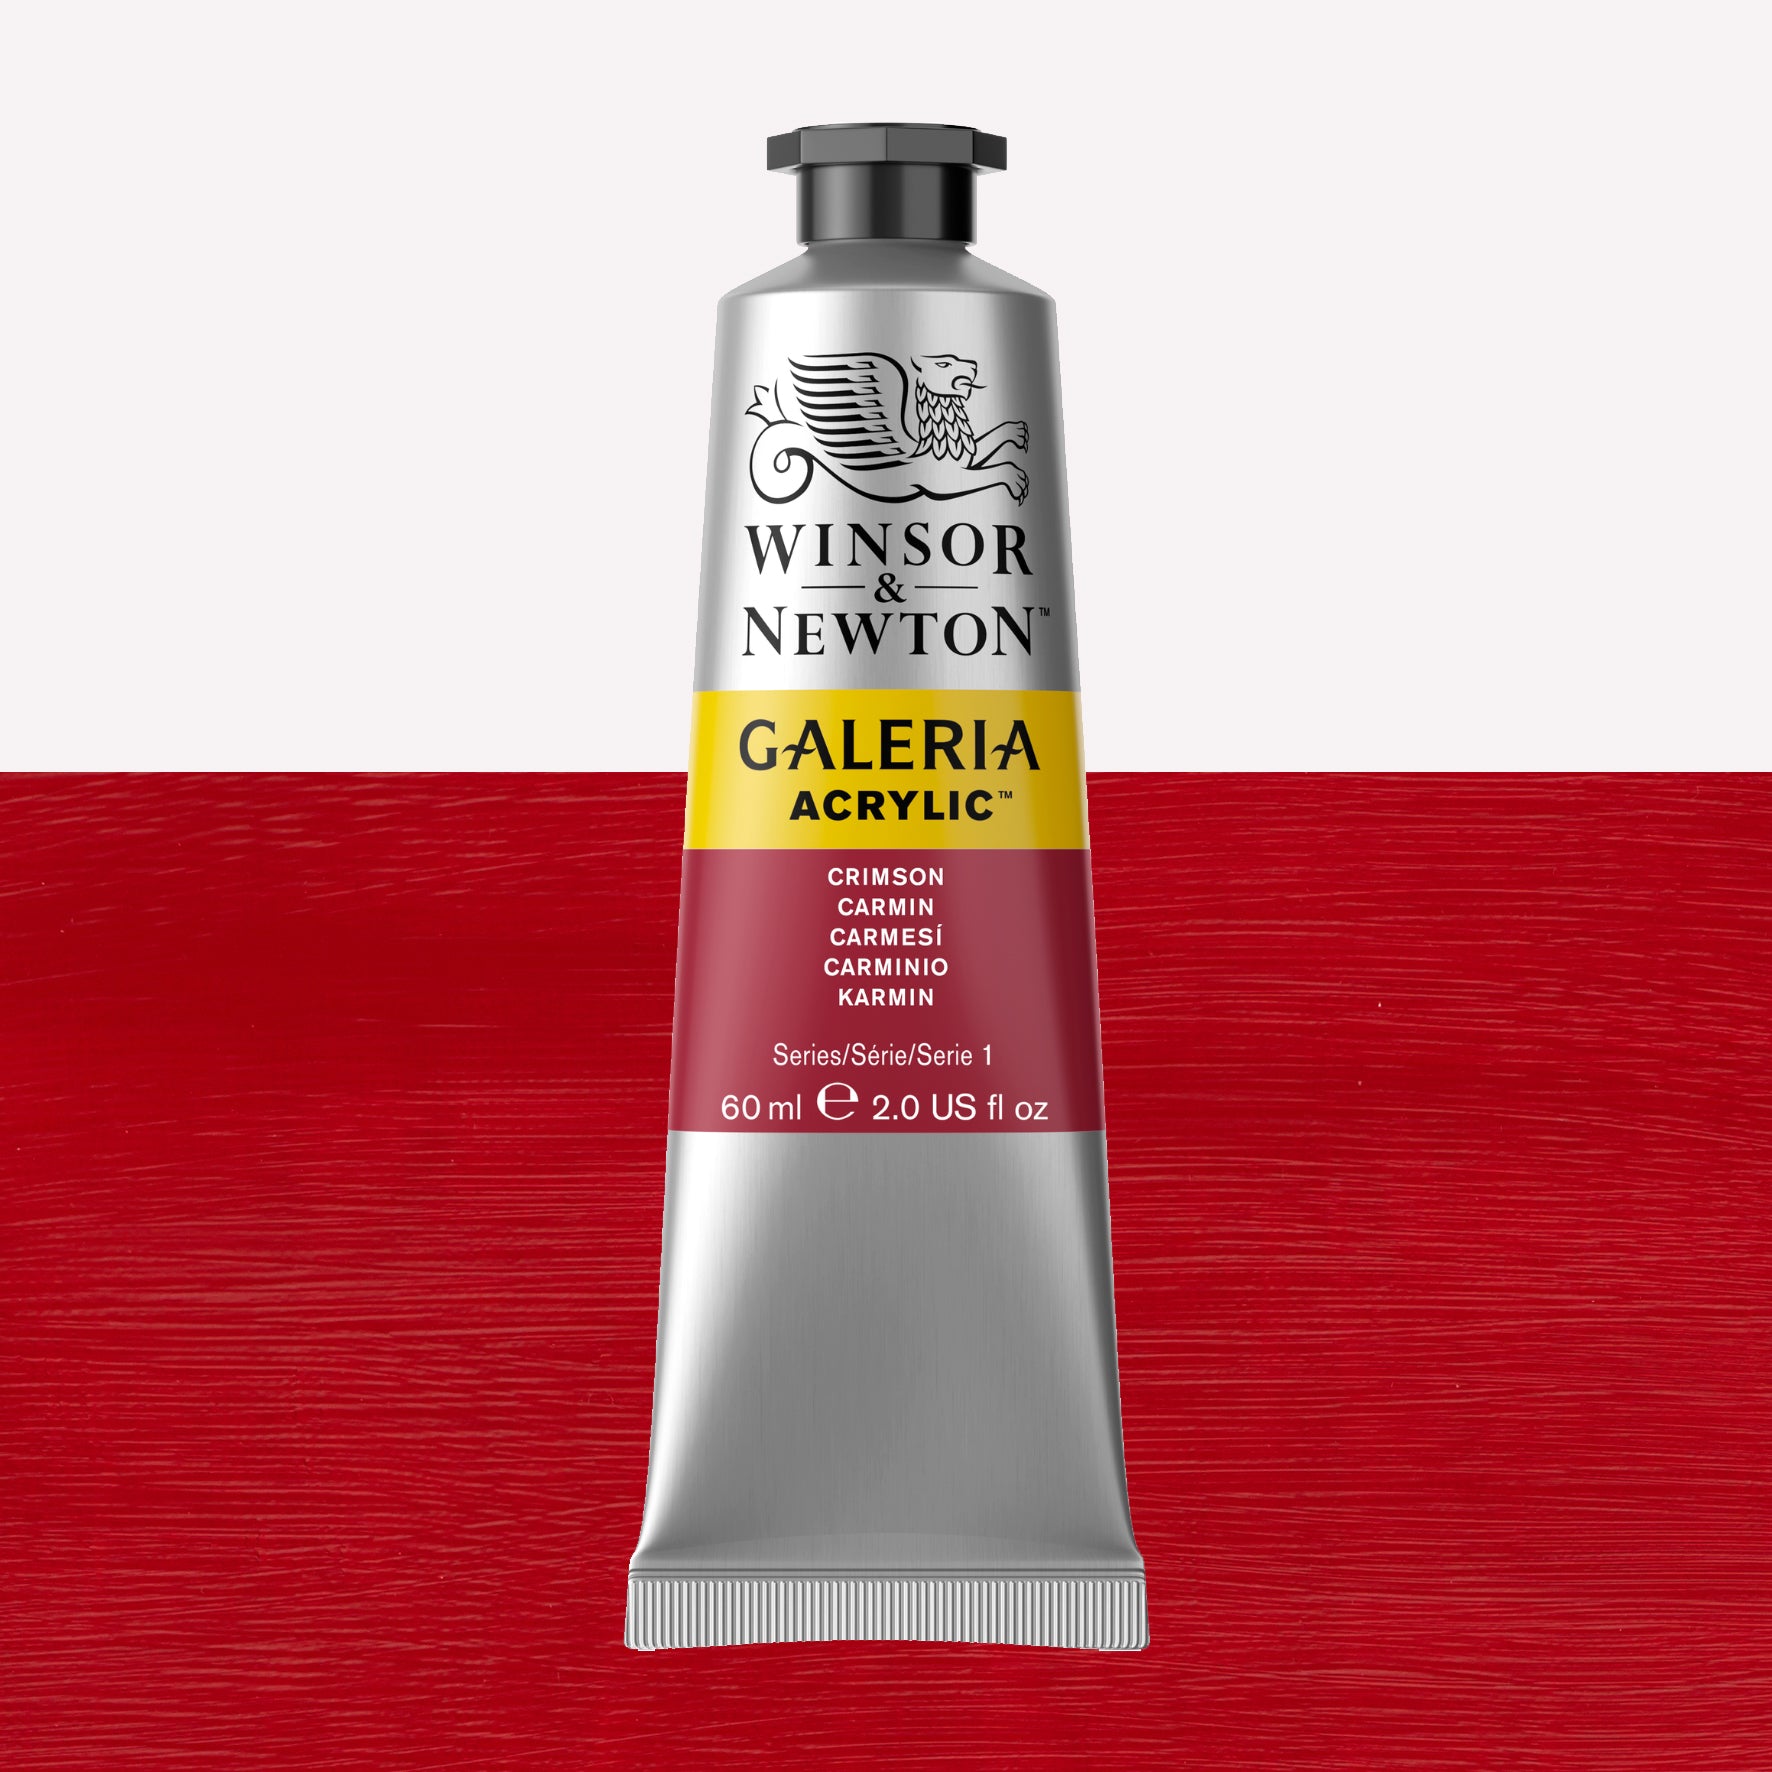 A 60ml tube of vibrant Galeria Acrylic paint in the shade Crimson. This paint, made by Winsor and Newton, is packaged in a silver tube with a black lid. 